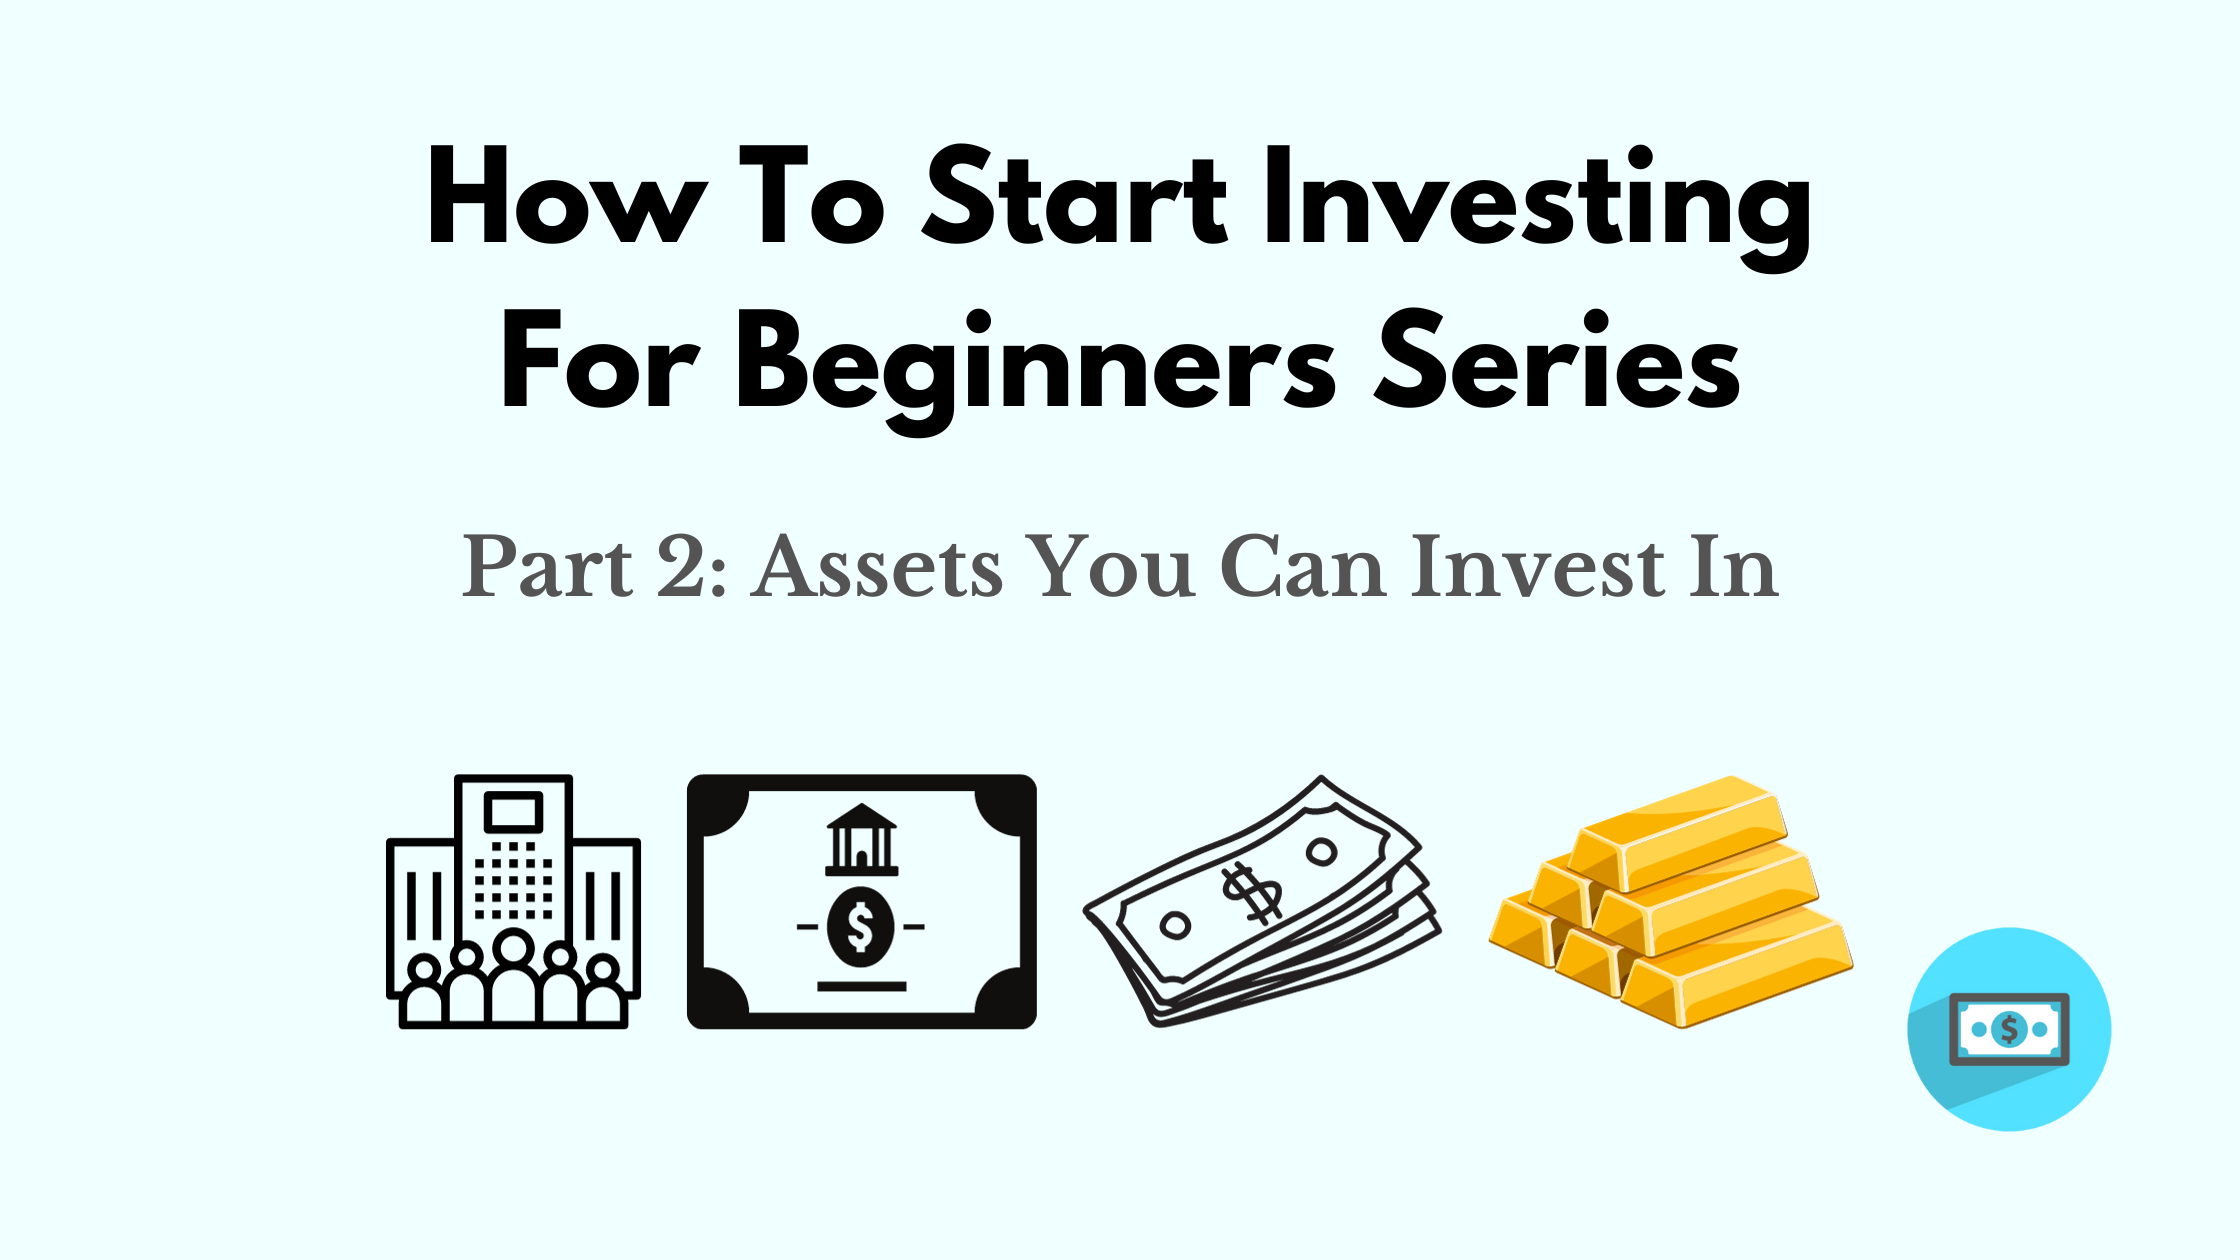 How To Start Investing For Beginners Part 2